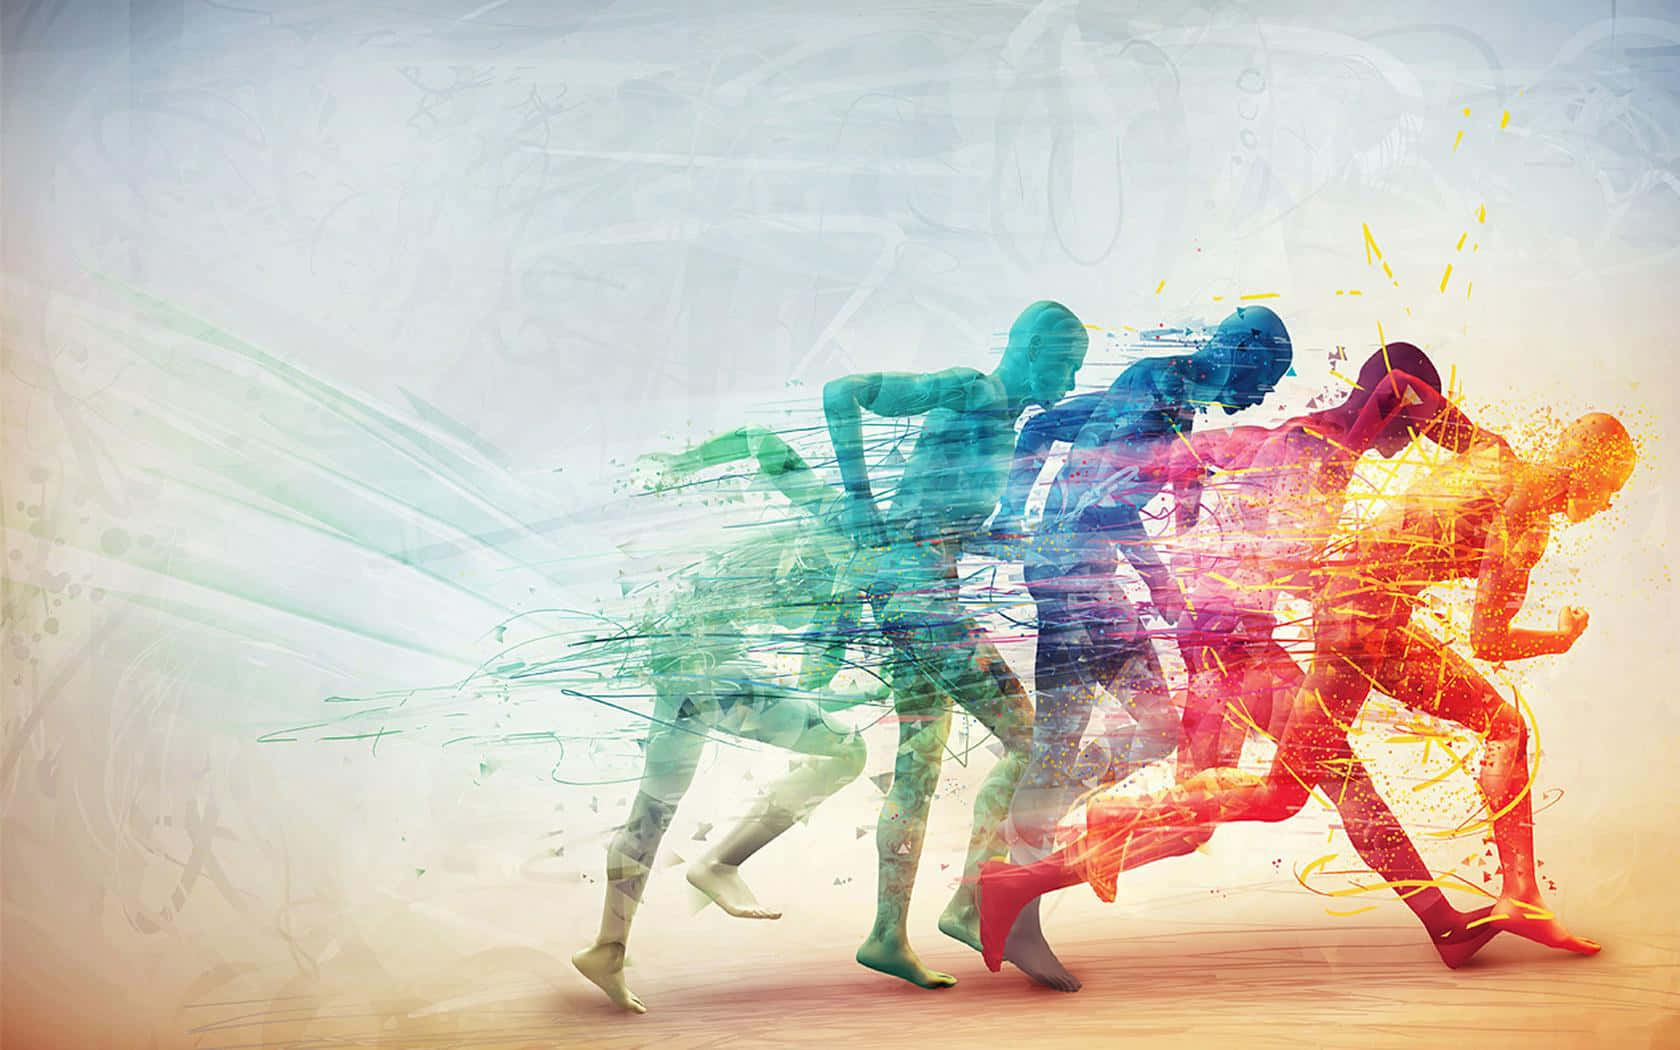 Physical Therapy Running Humans Colorful Digital Art Wallpaper